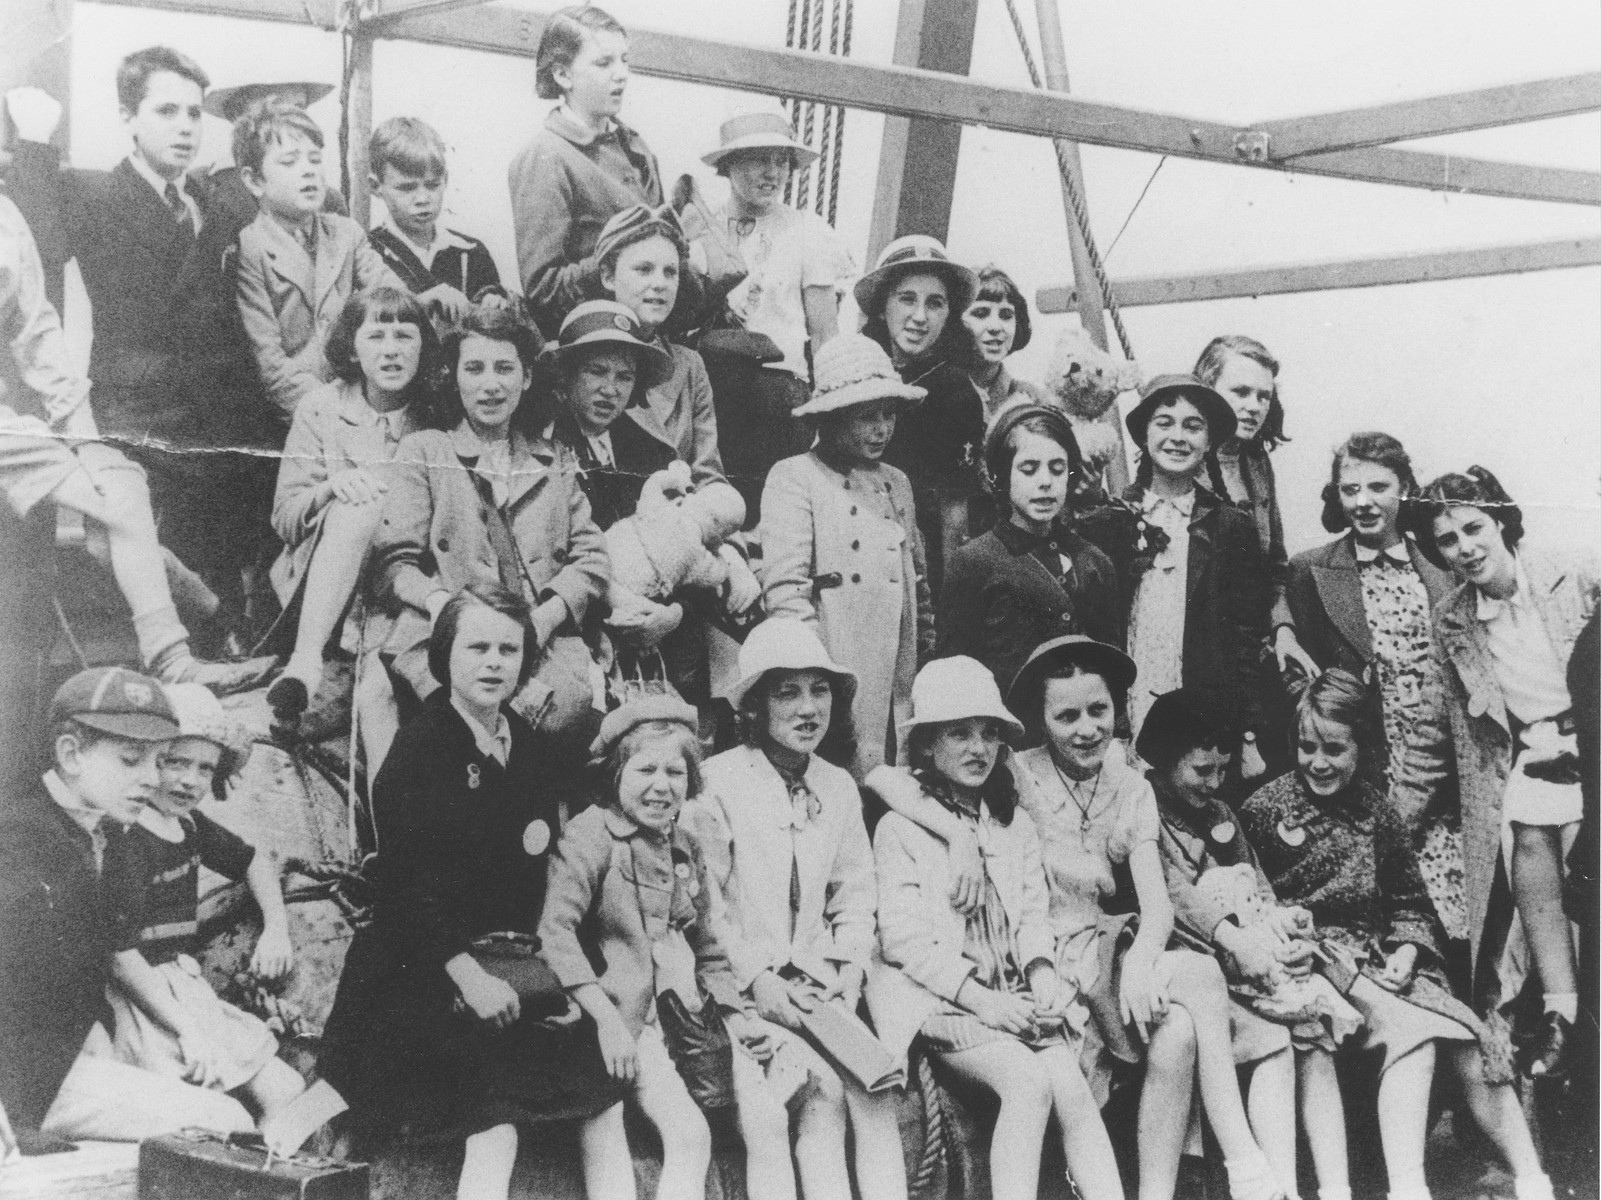 Group portrait of Jewish refugee children from Germany and London, on the deck of the MS Batory as the ship arrives in Melbourne.

Pictured standing in the second row, on the right (wearing a light dress and a dark jacket, with braids) is Jean Schultz (later Saltzman).